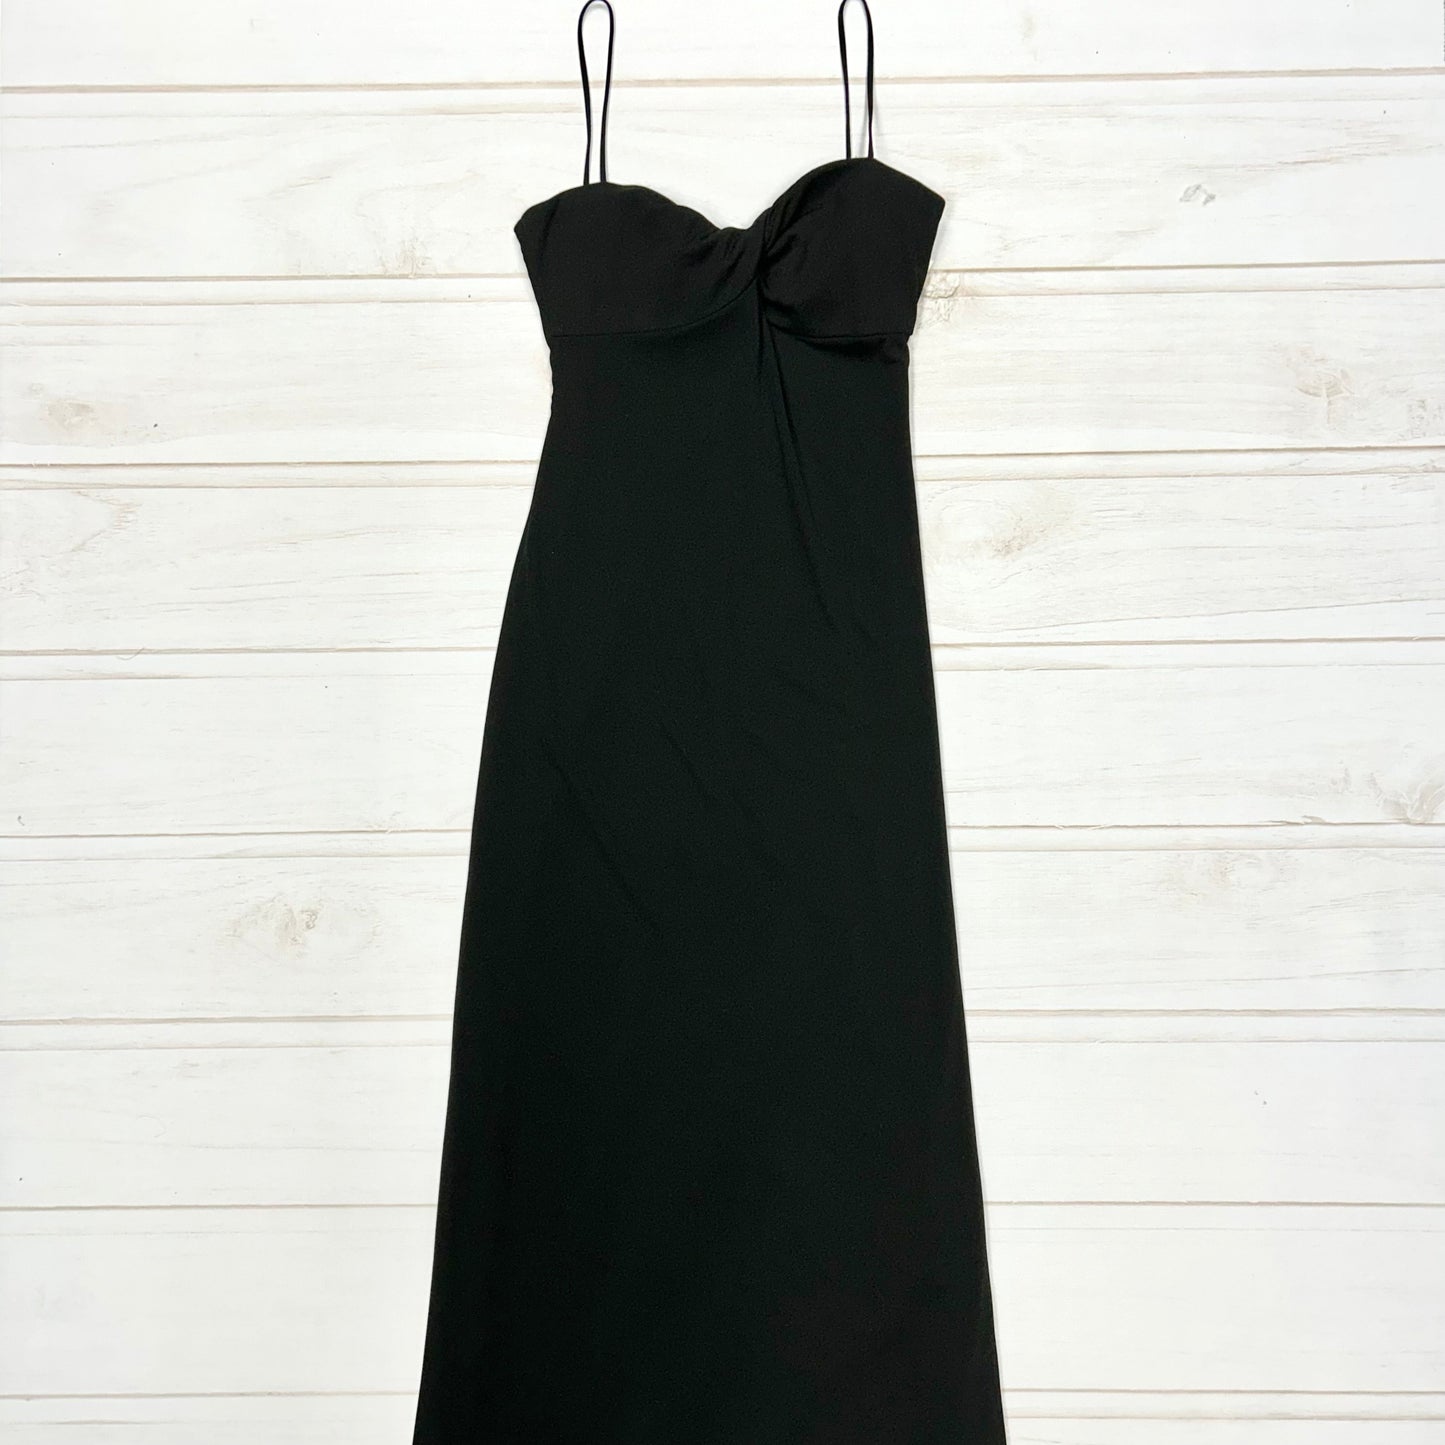 Dress Party Midi By Laundry  Size: M